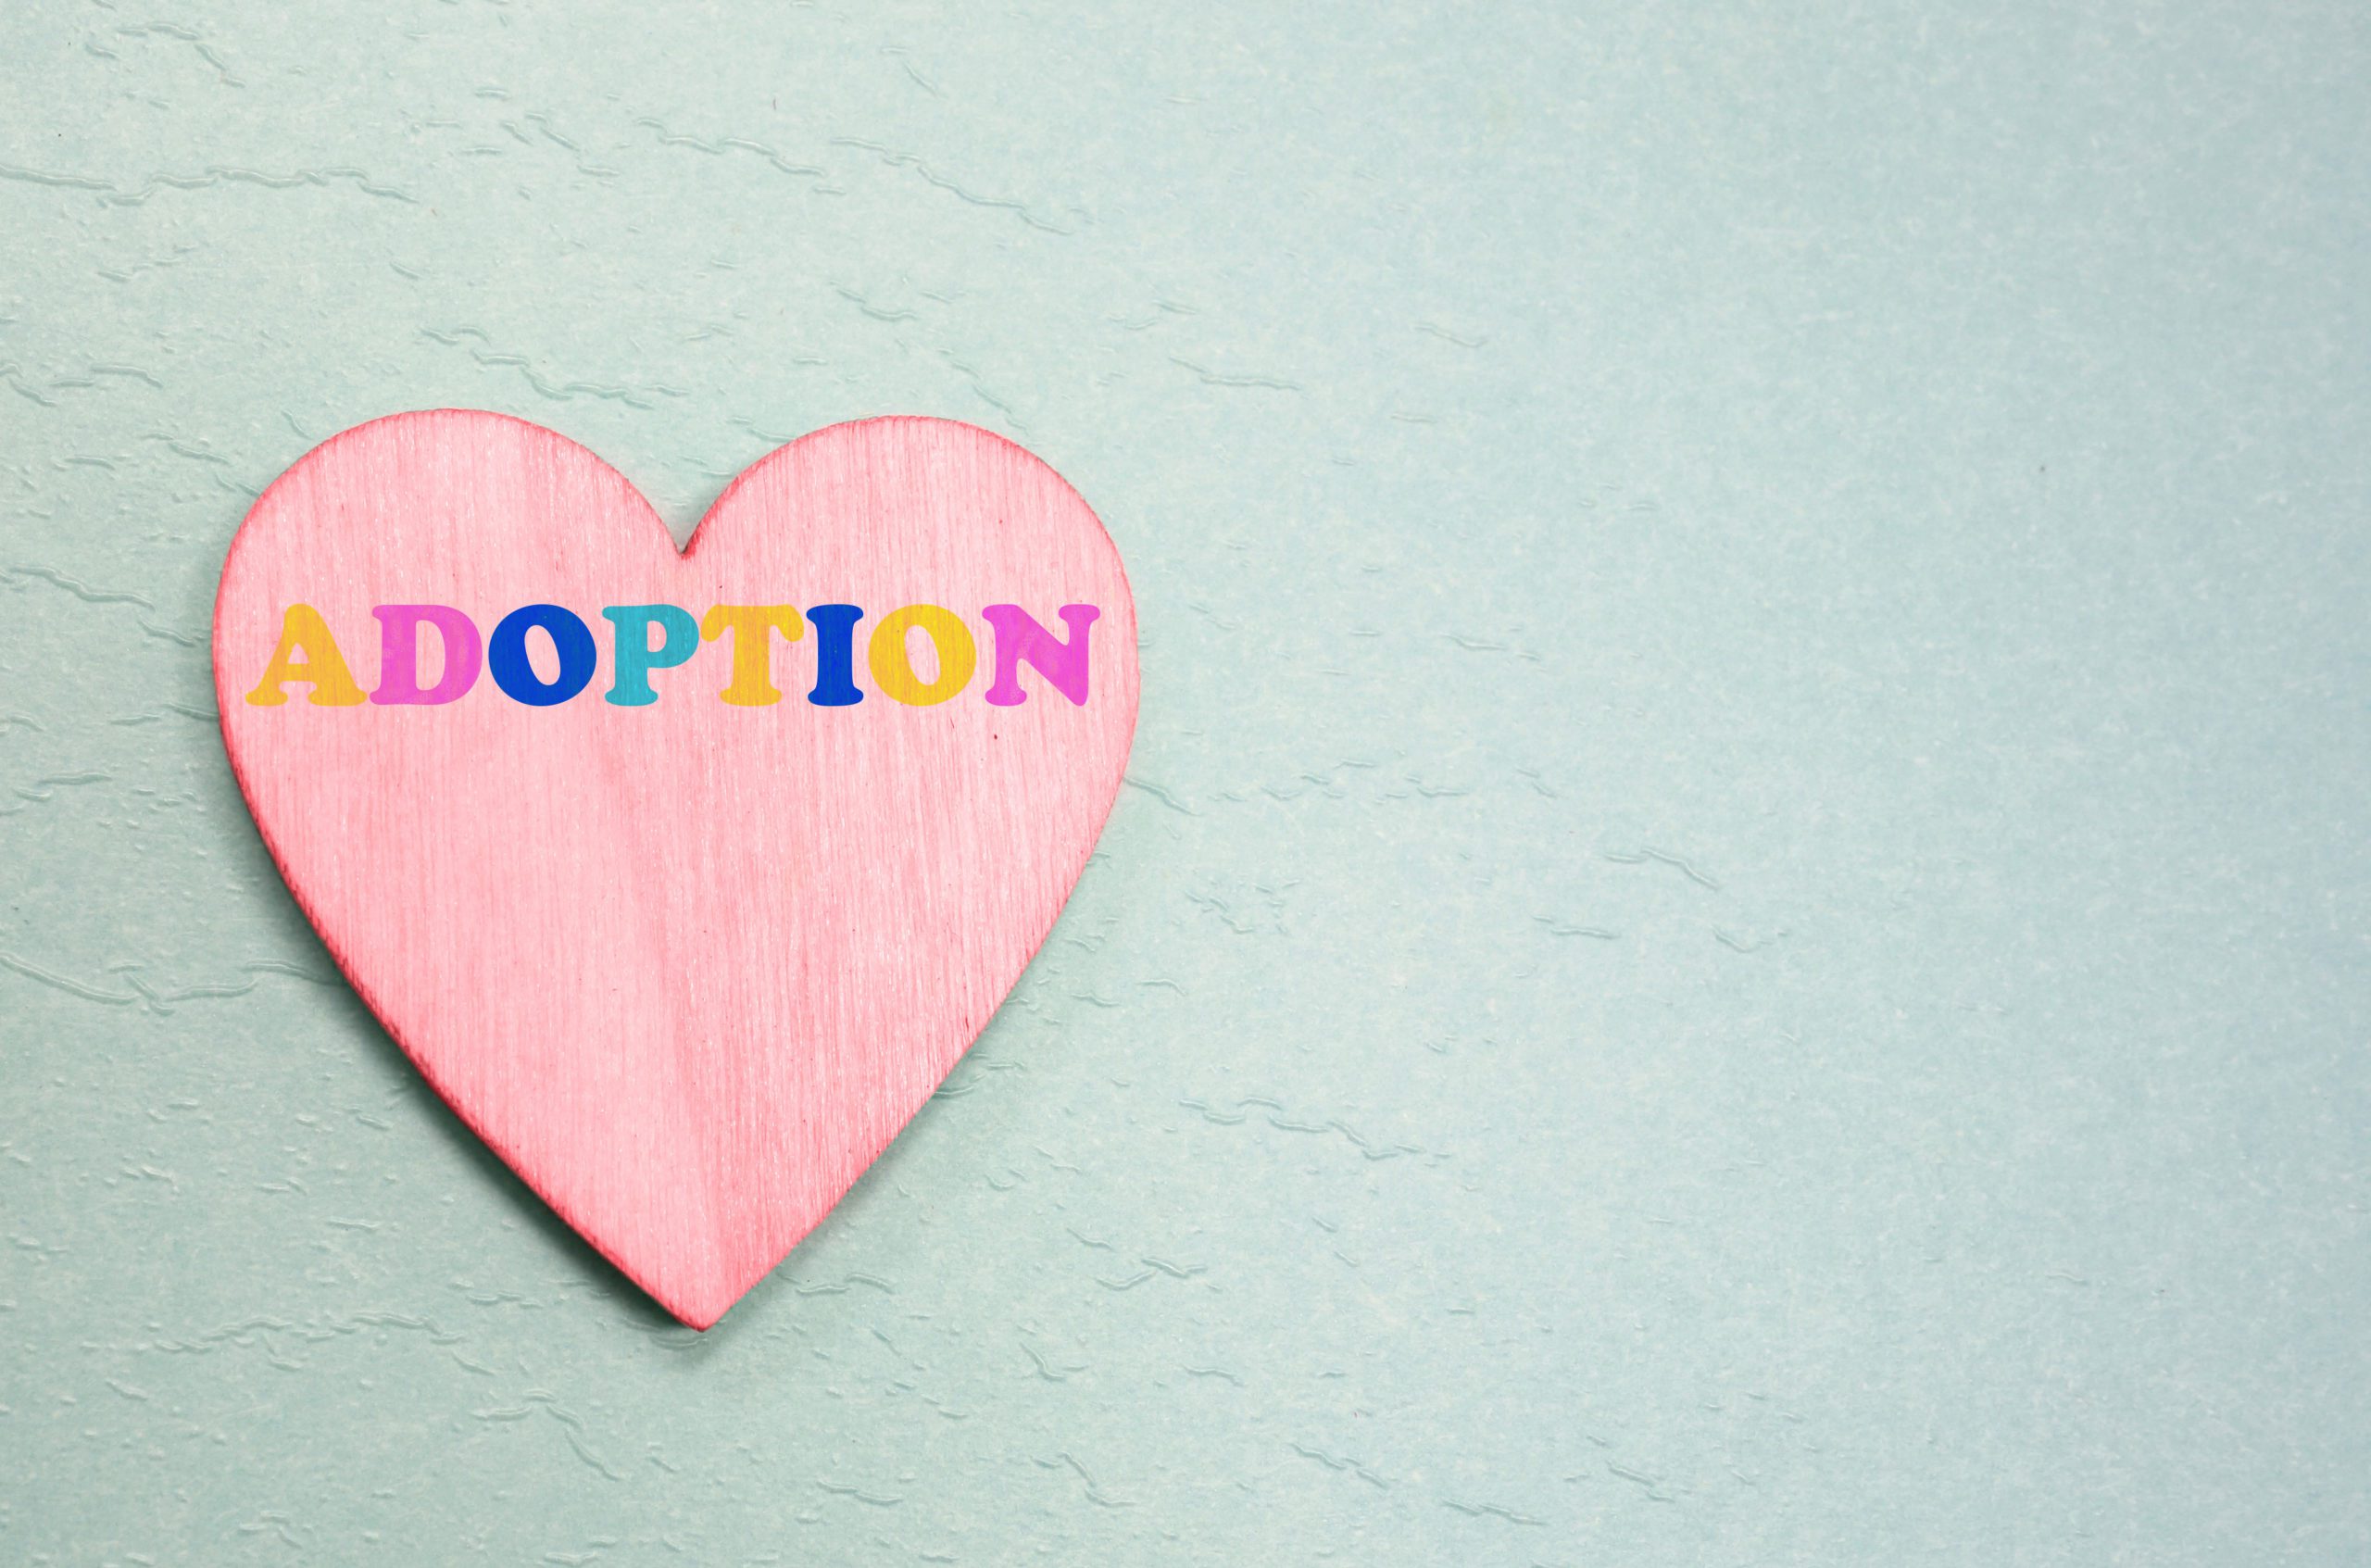 The word adoption written in multicolor letters on a pink heart, with a soft blue background.